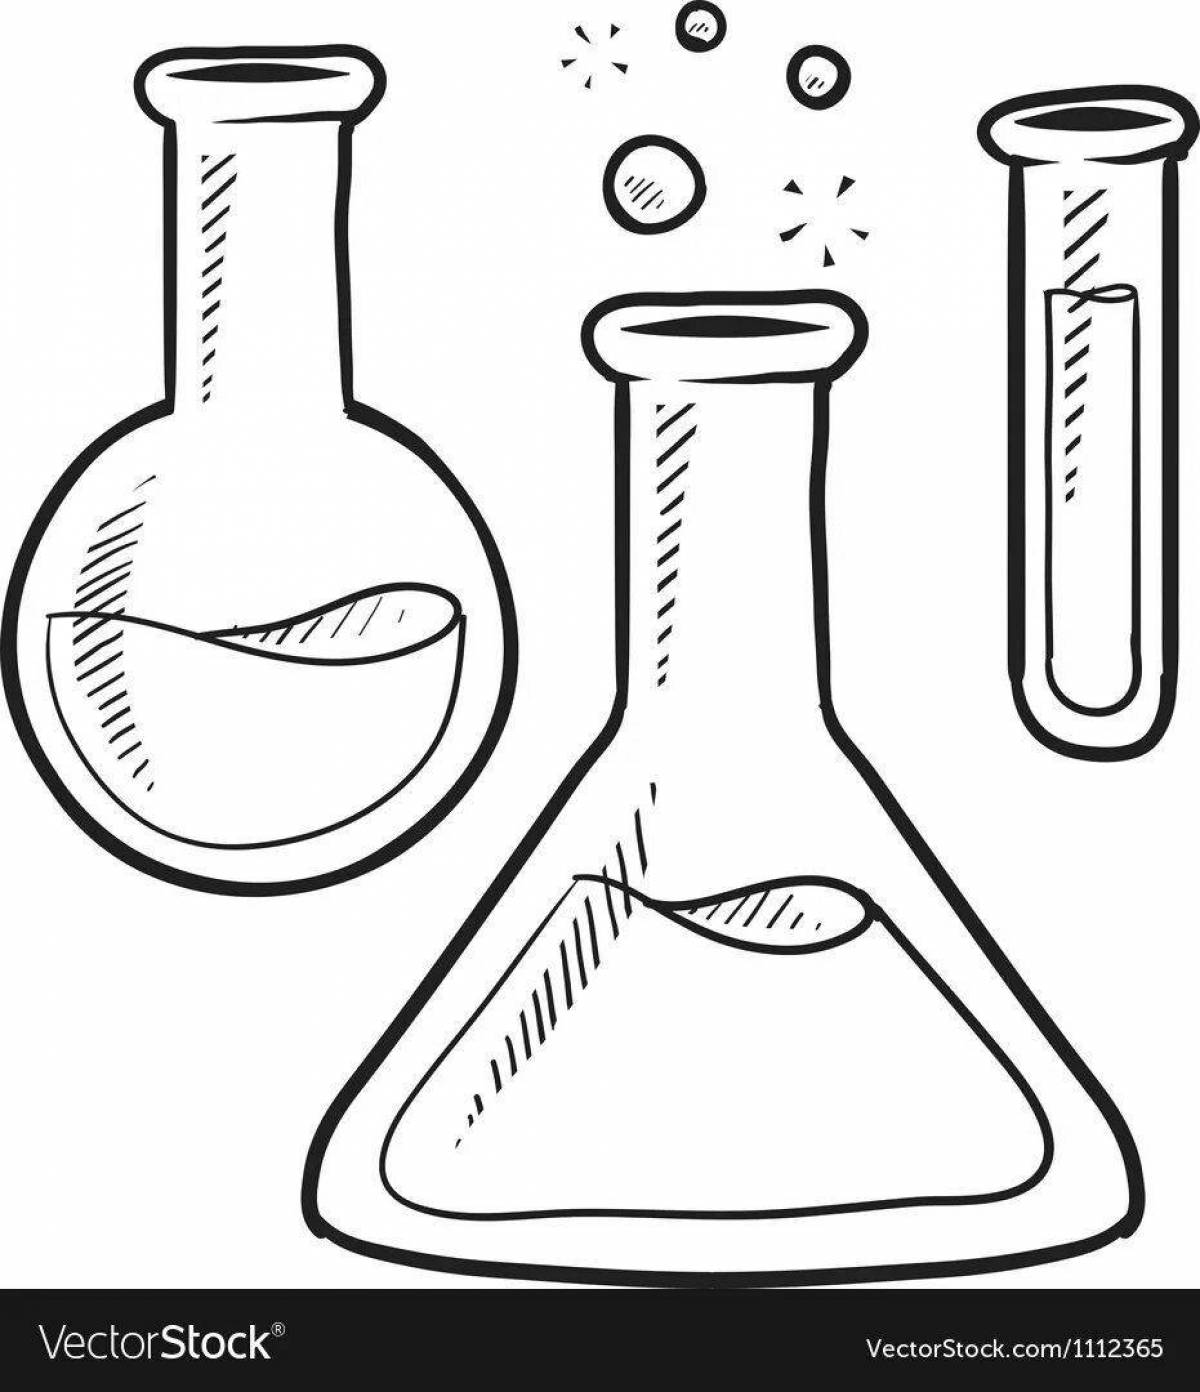 Bright chemistry coloring book for kids